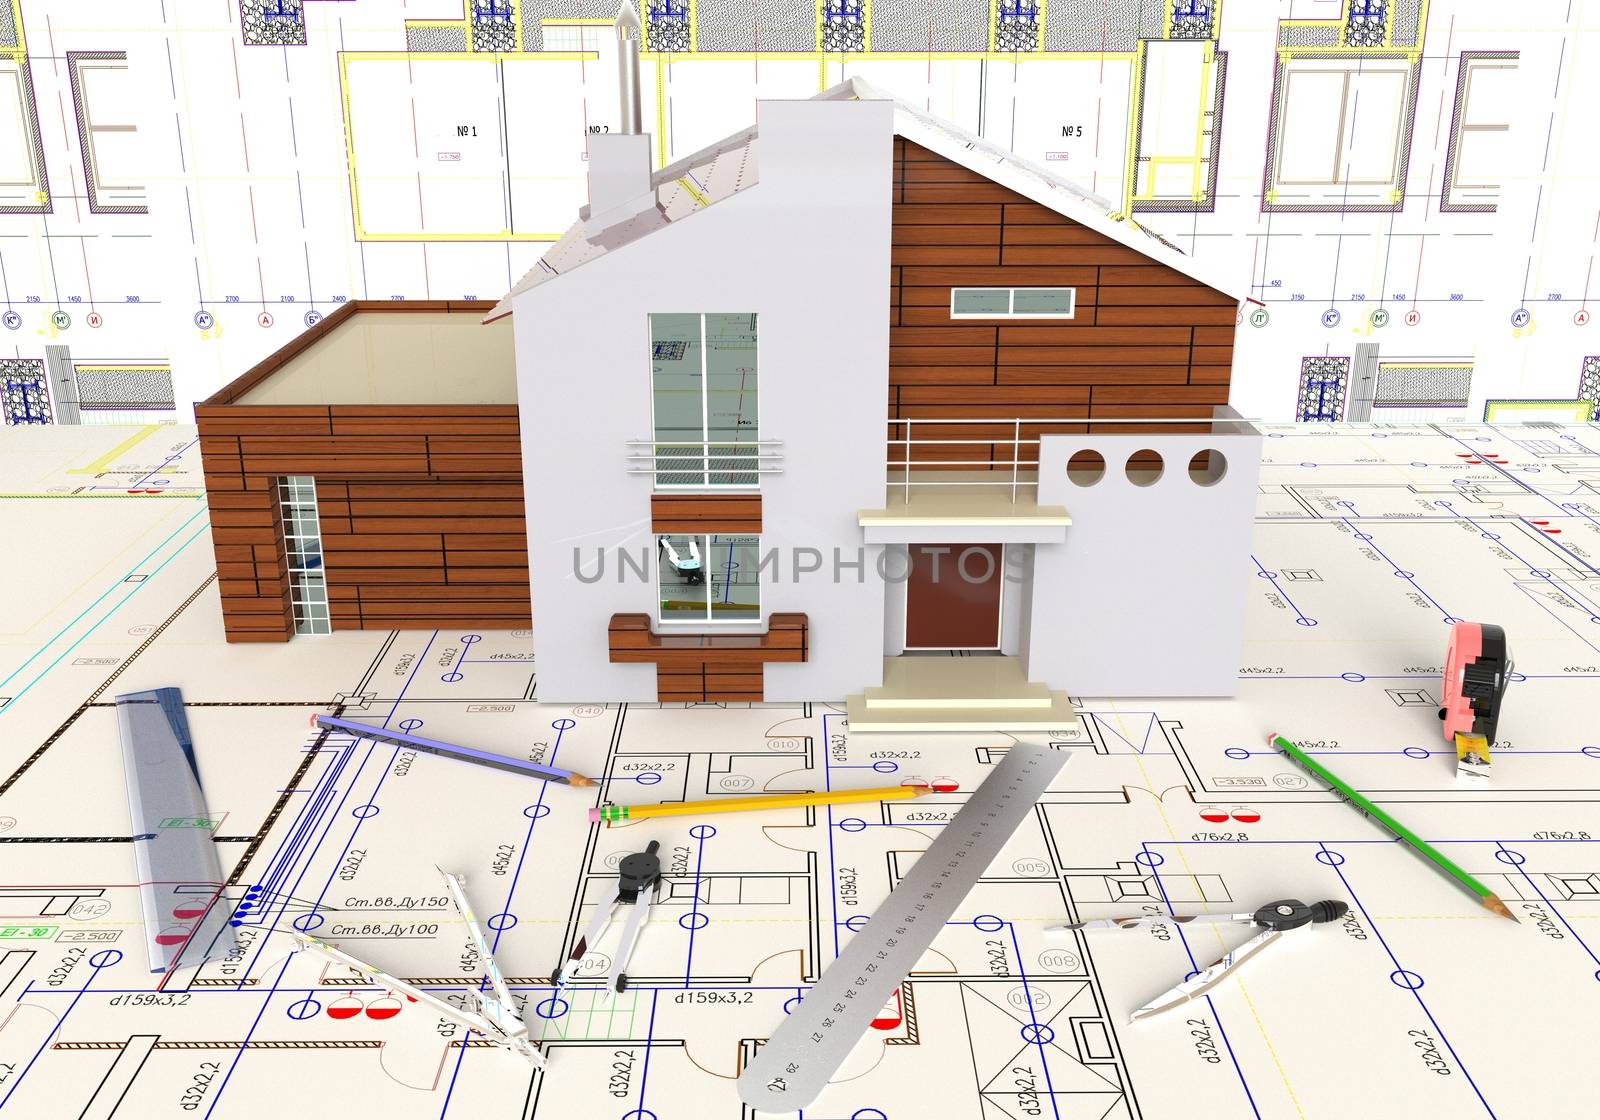 Rendering of the house architectural drawing and layout